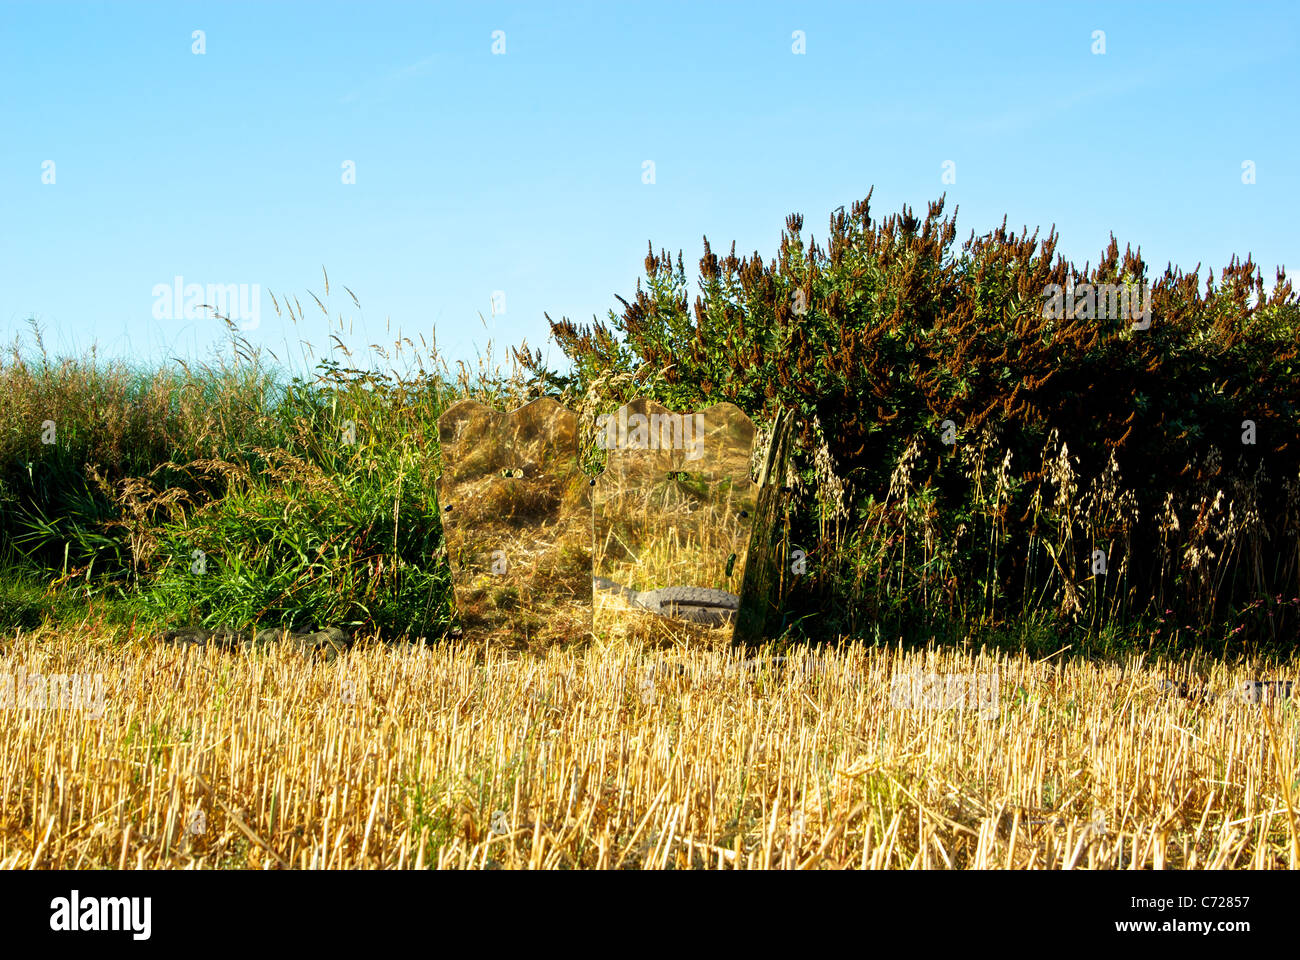 Goose hunting blurring reflection mylar mirror blind blends into field of harvested oats stubble field Stock Photo